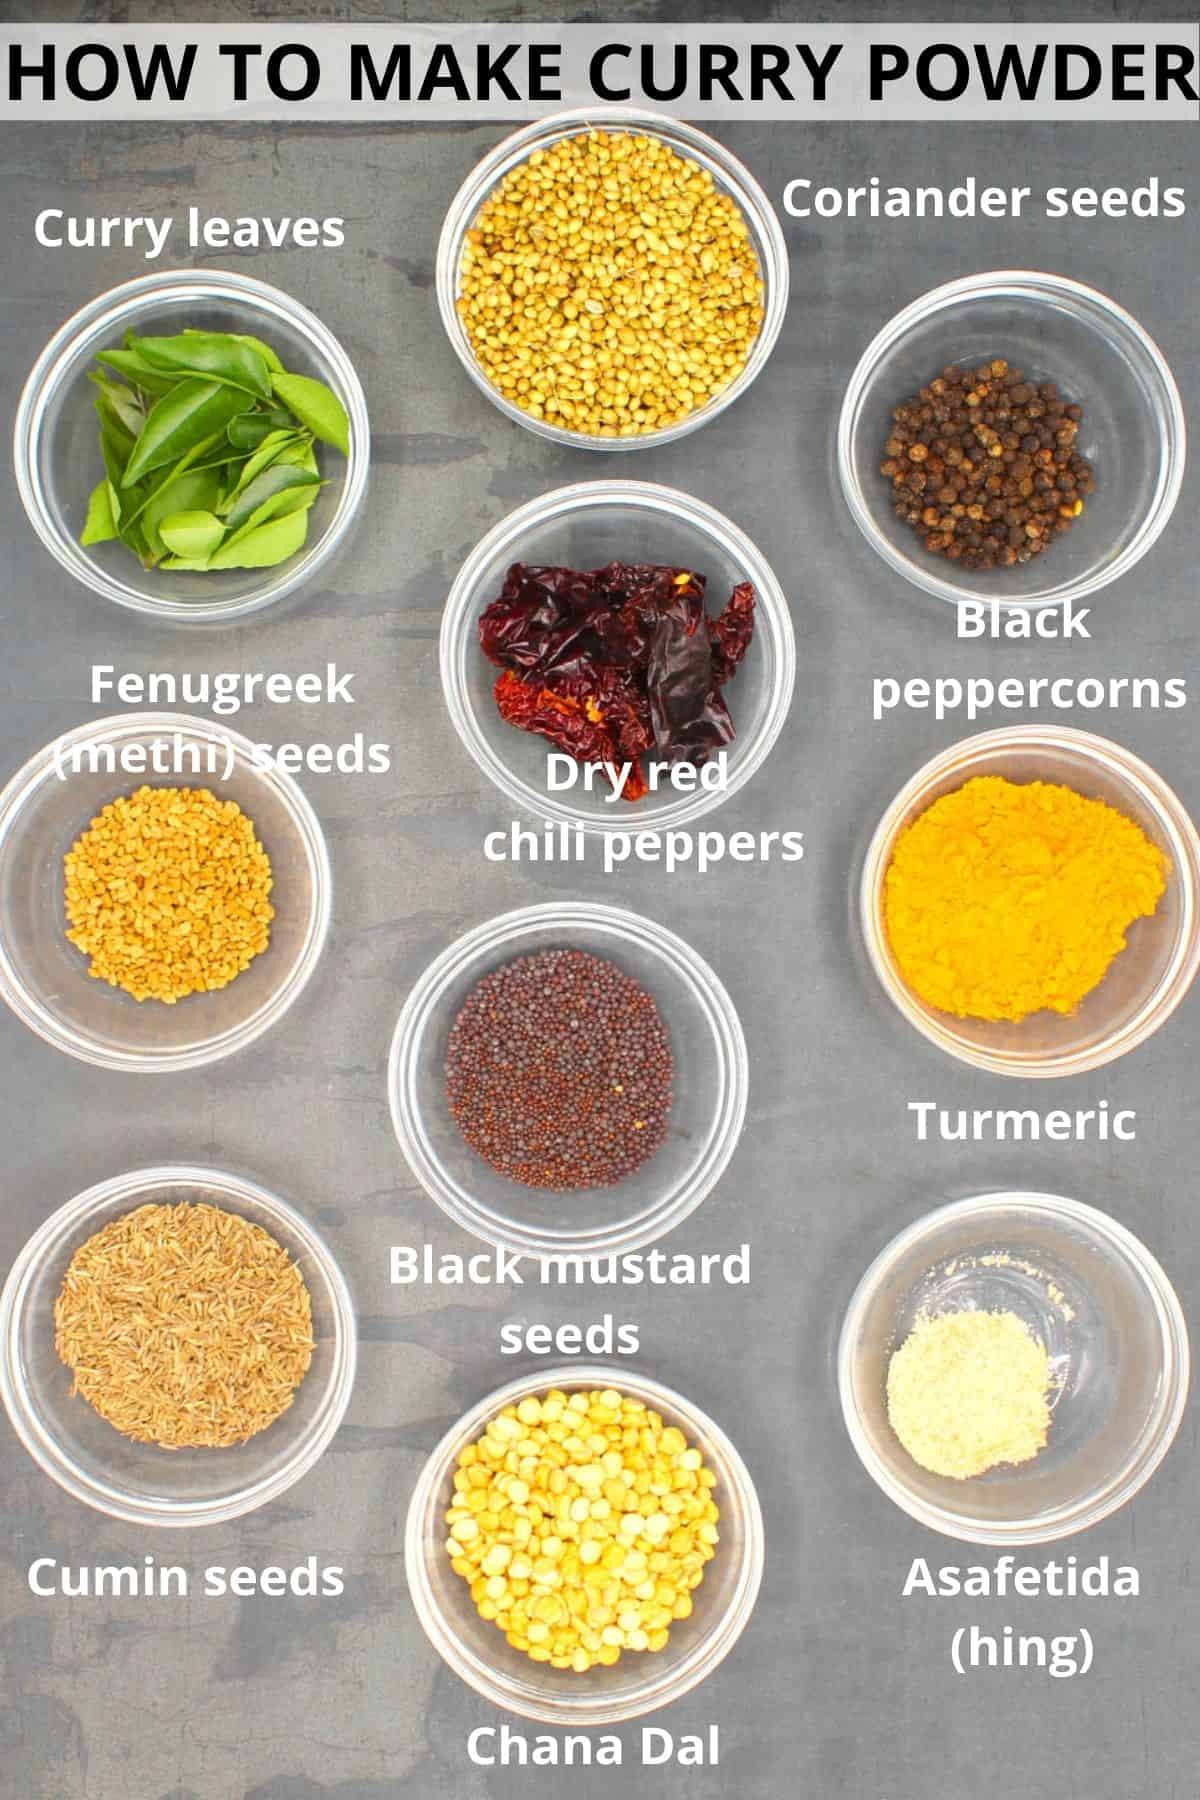 Photo of the ingredients in curry powder in small pinch bowls, including coriander seeds, curry leaves, fenugreek seeds, cumin seeds, dry red chili peppers, black peppercorns, turmeric, mustard seeds, asafetida and chana dal.